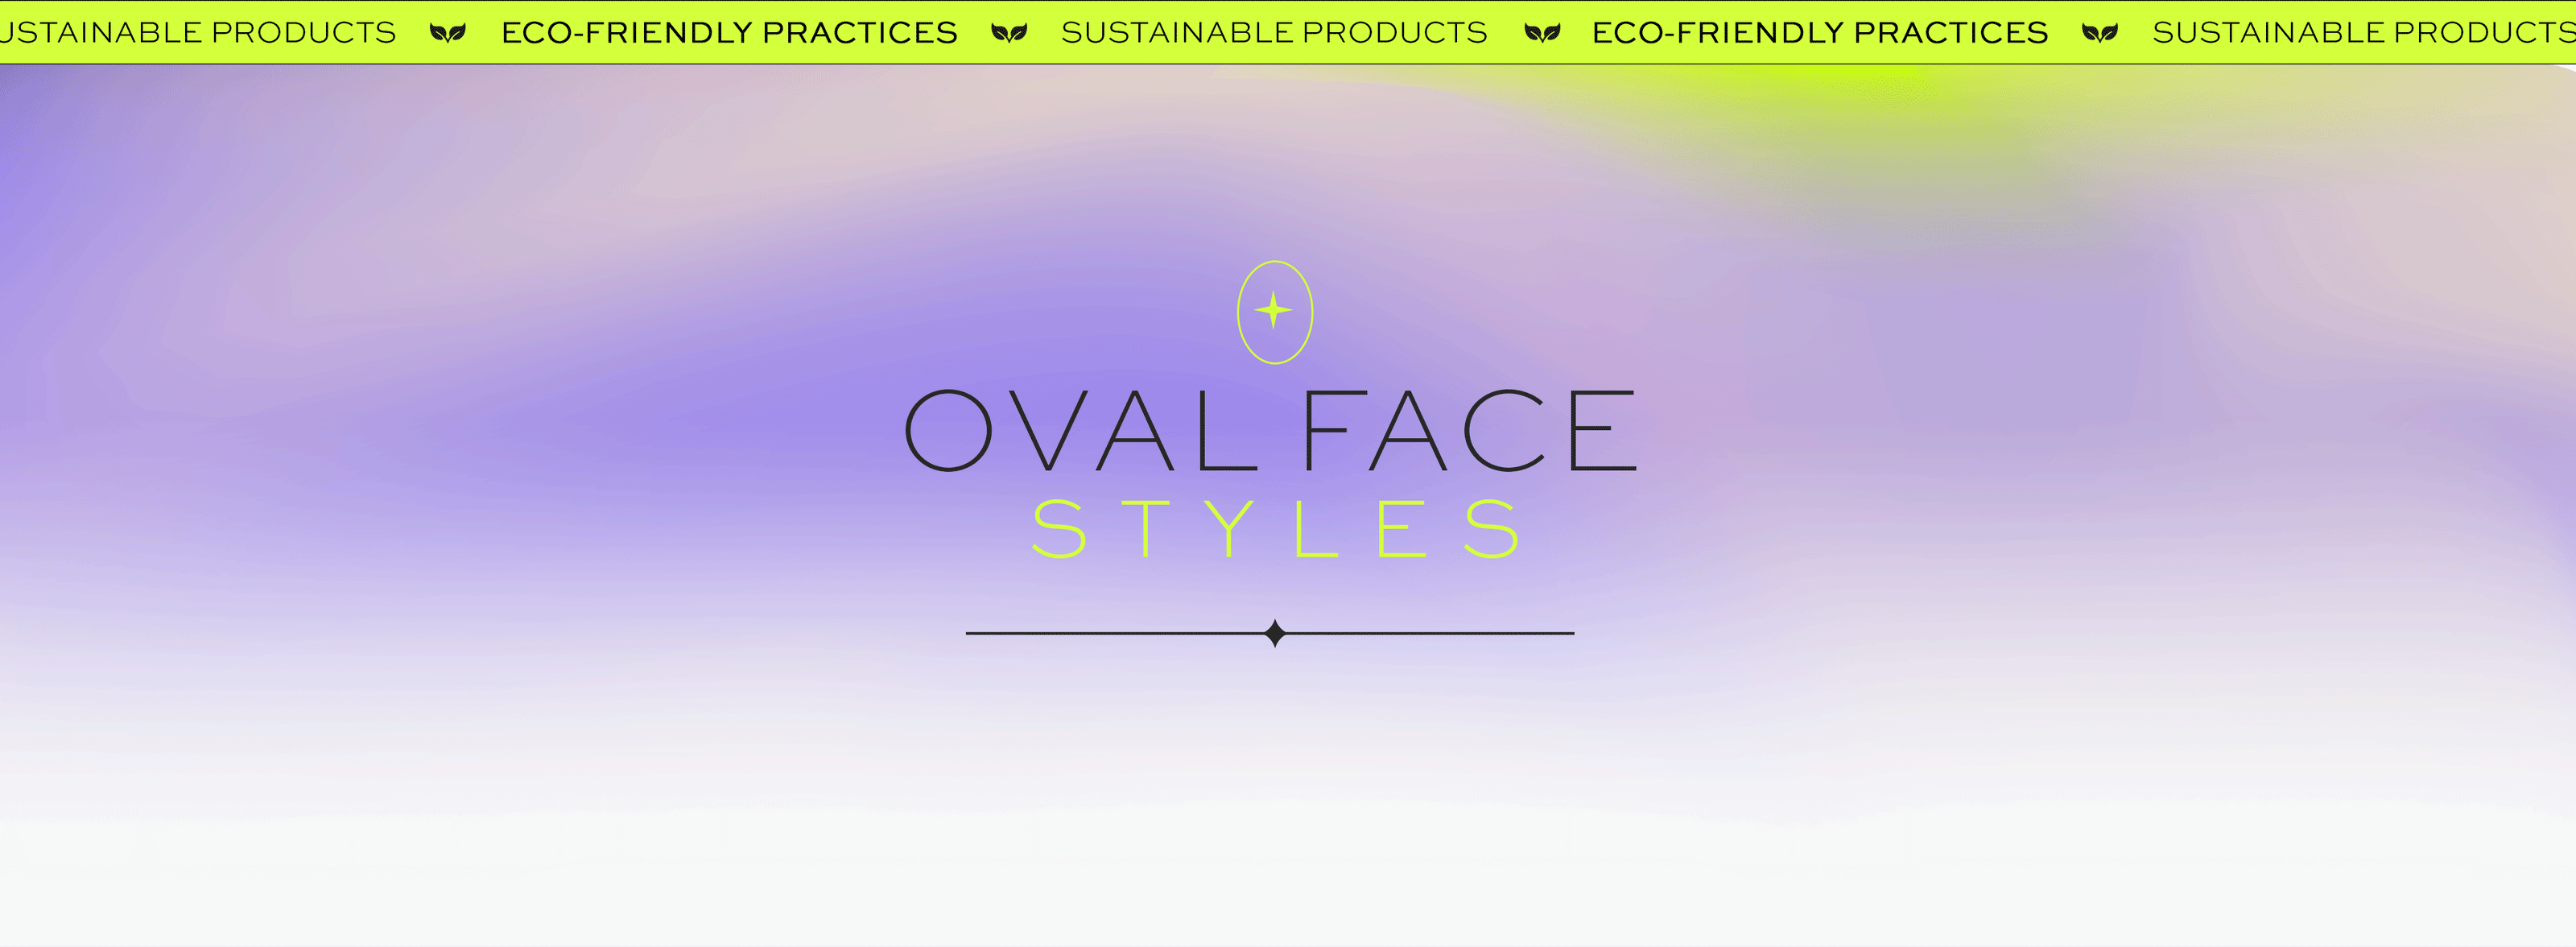 Oval Face Styles